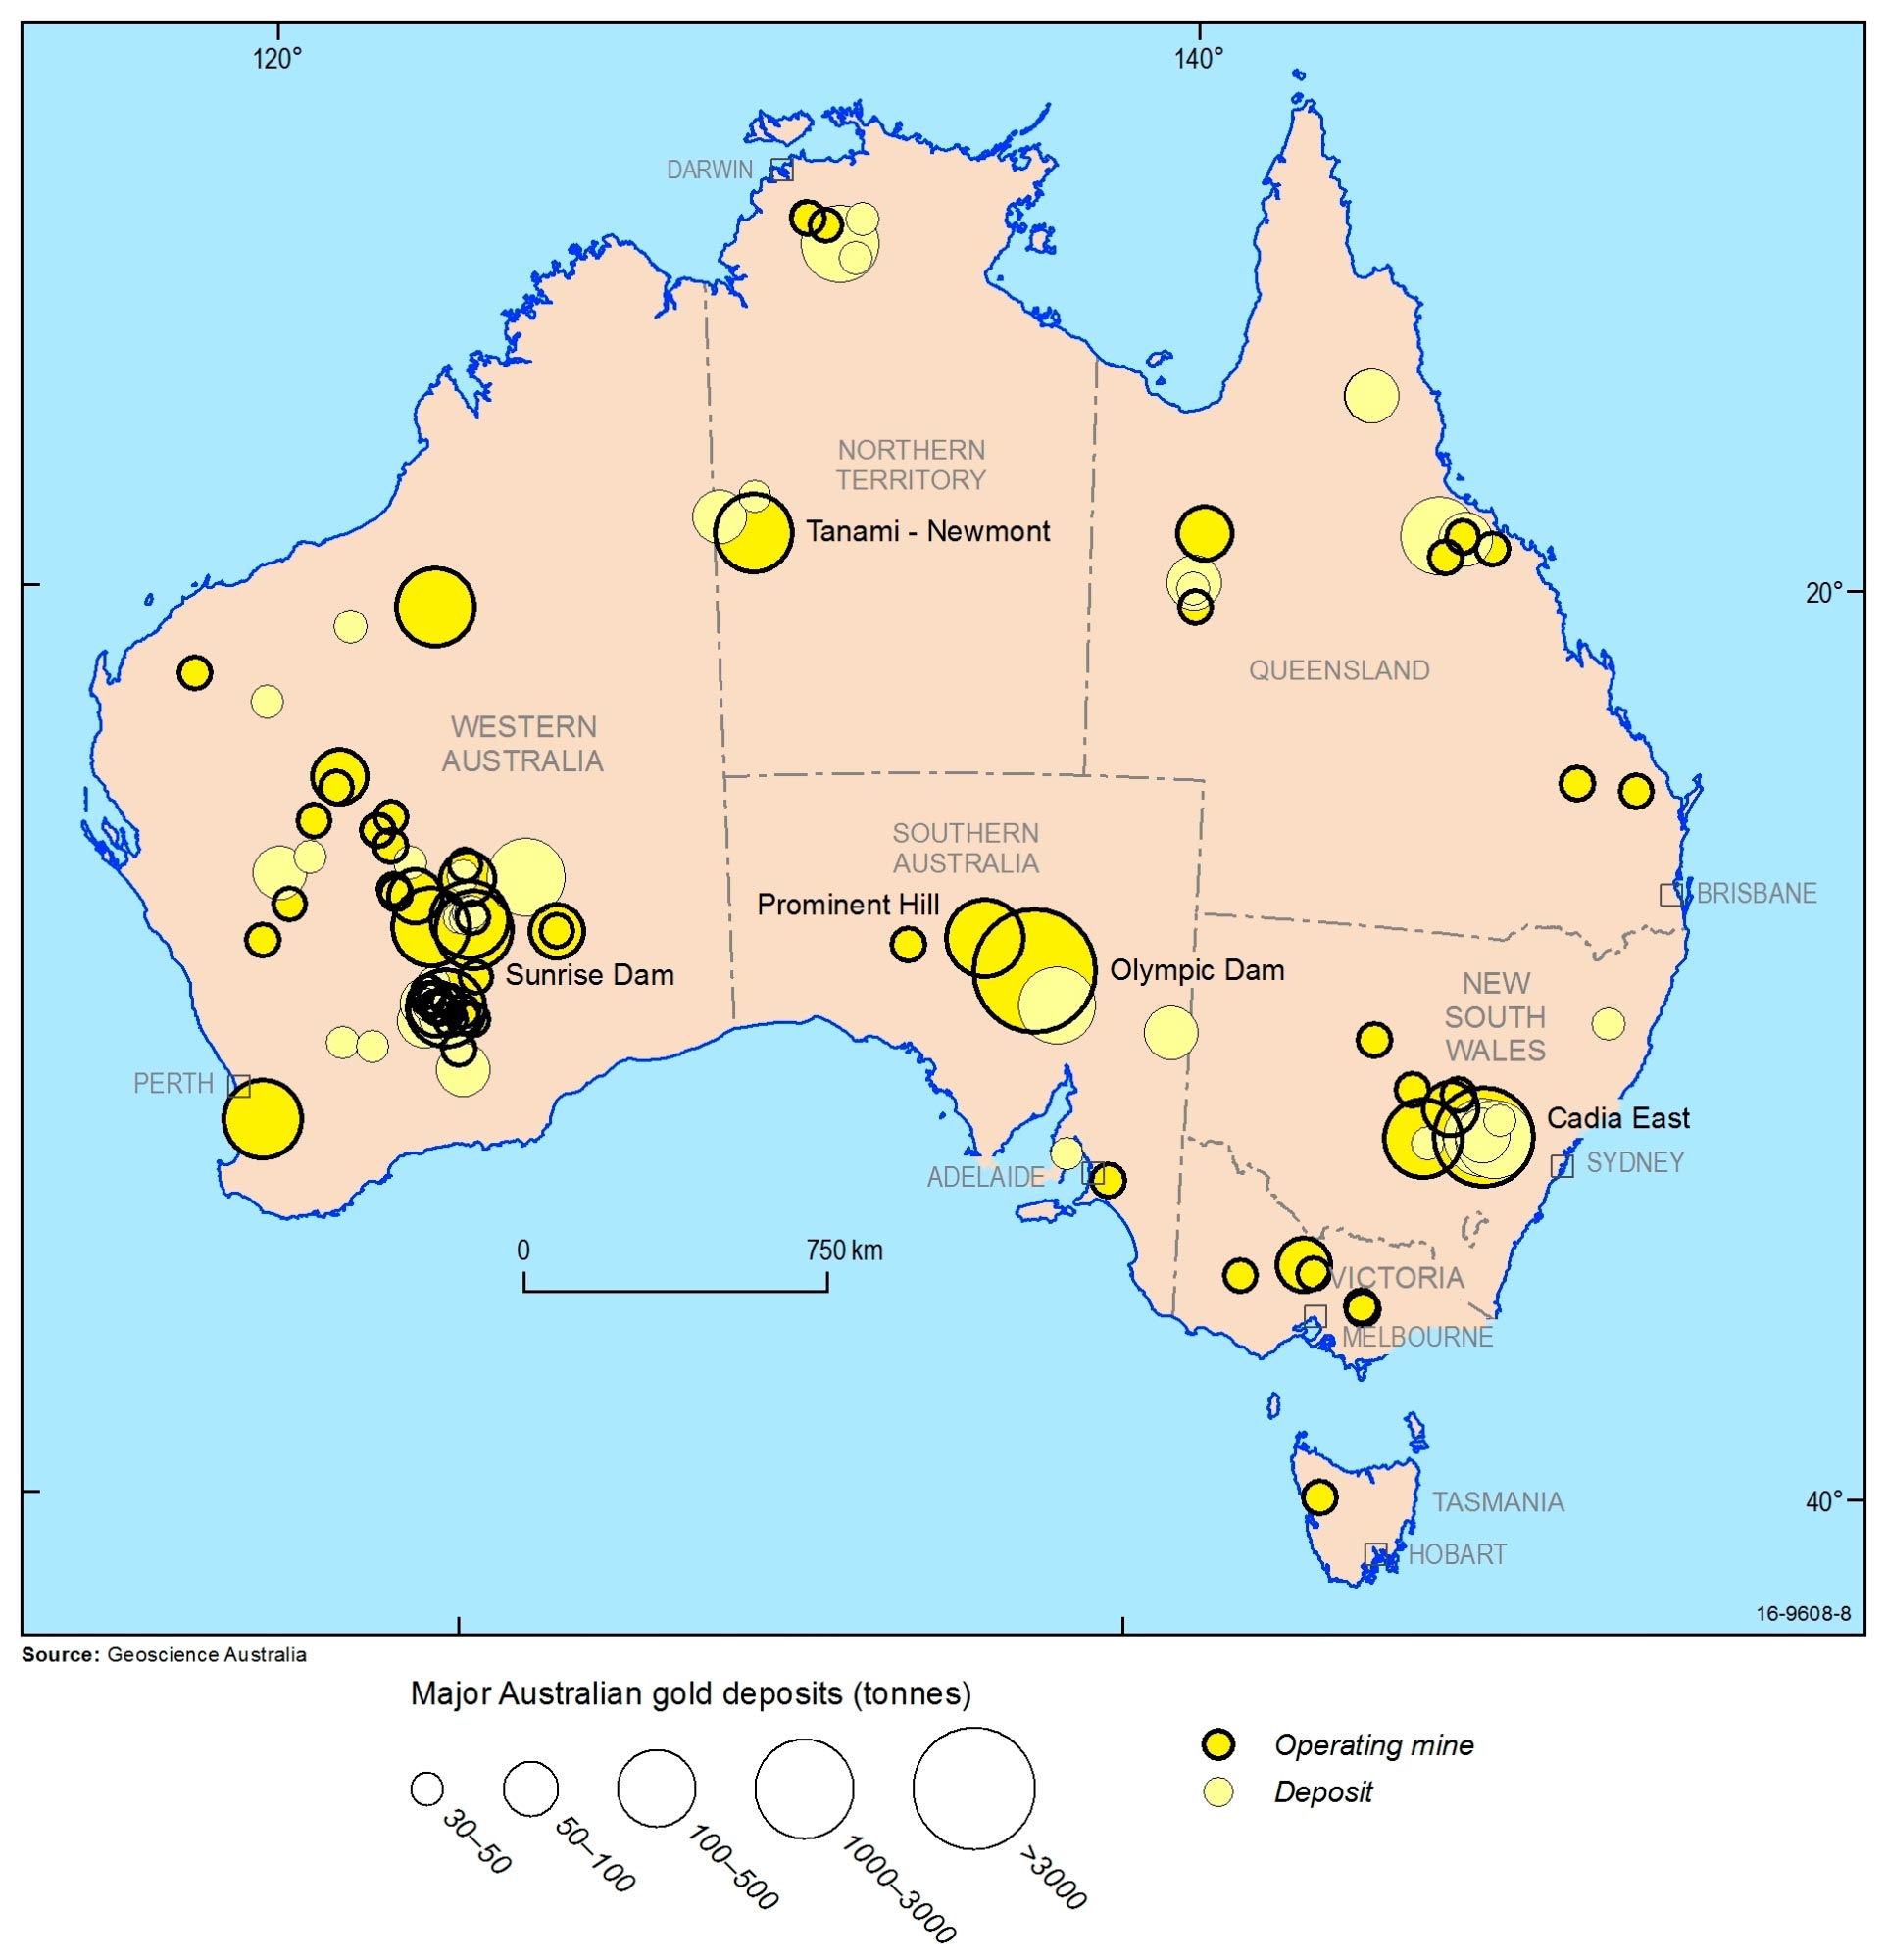 Australia's gold deposits and operating mines.